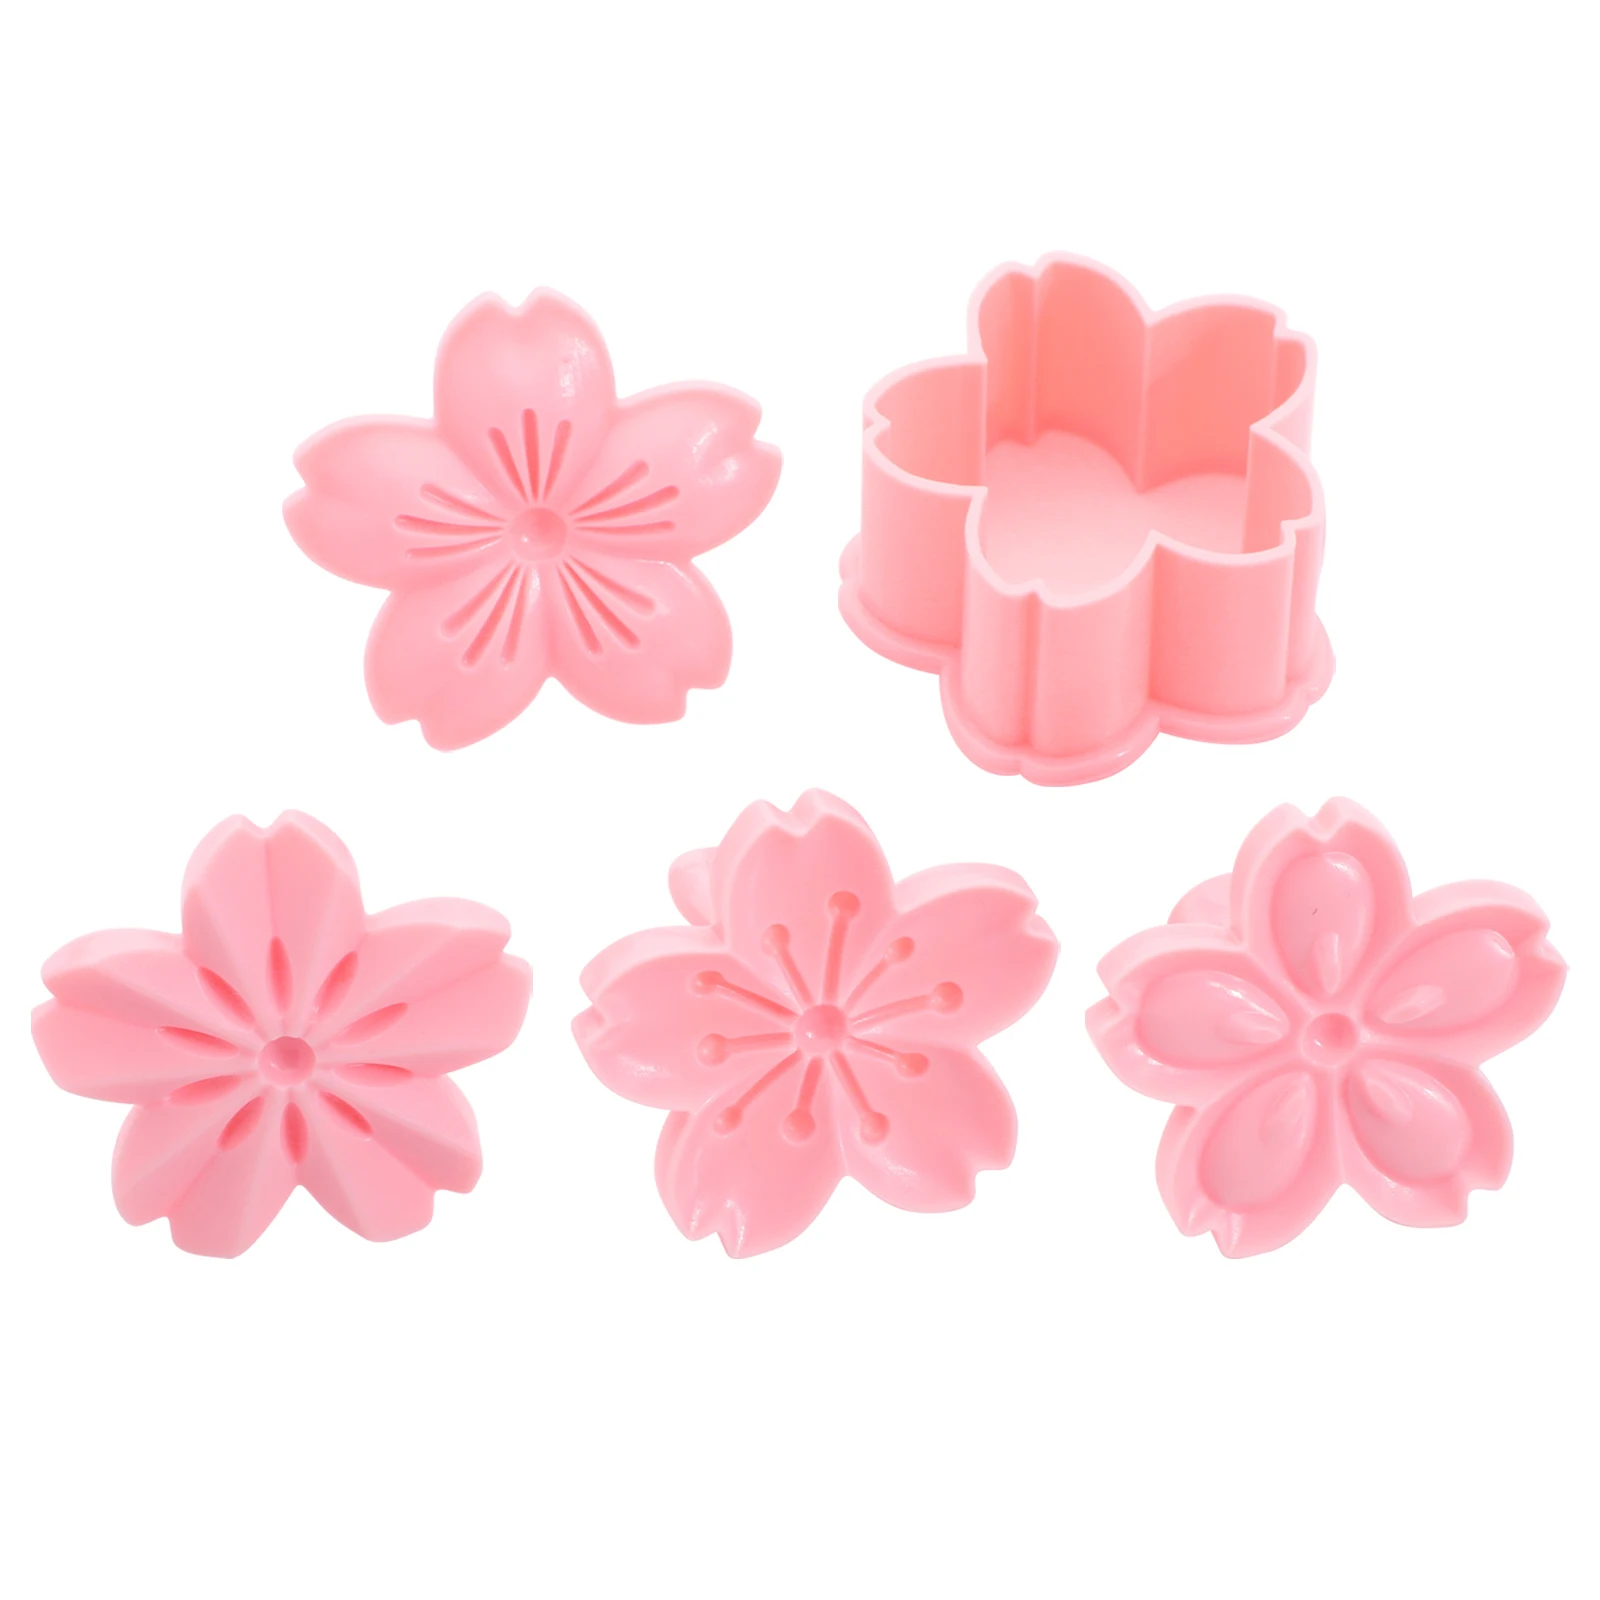 

5pcs/set Sakura Cookie Molds Cherry Blossom Stamps Plunger and Cutters Fondant Chocolate Mold Biscuit Pastry Cake Baking Tools